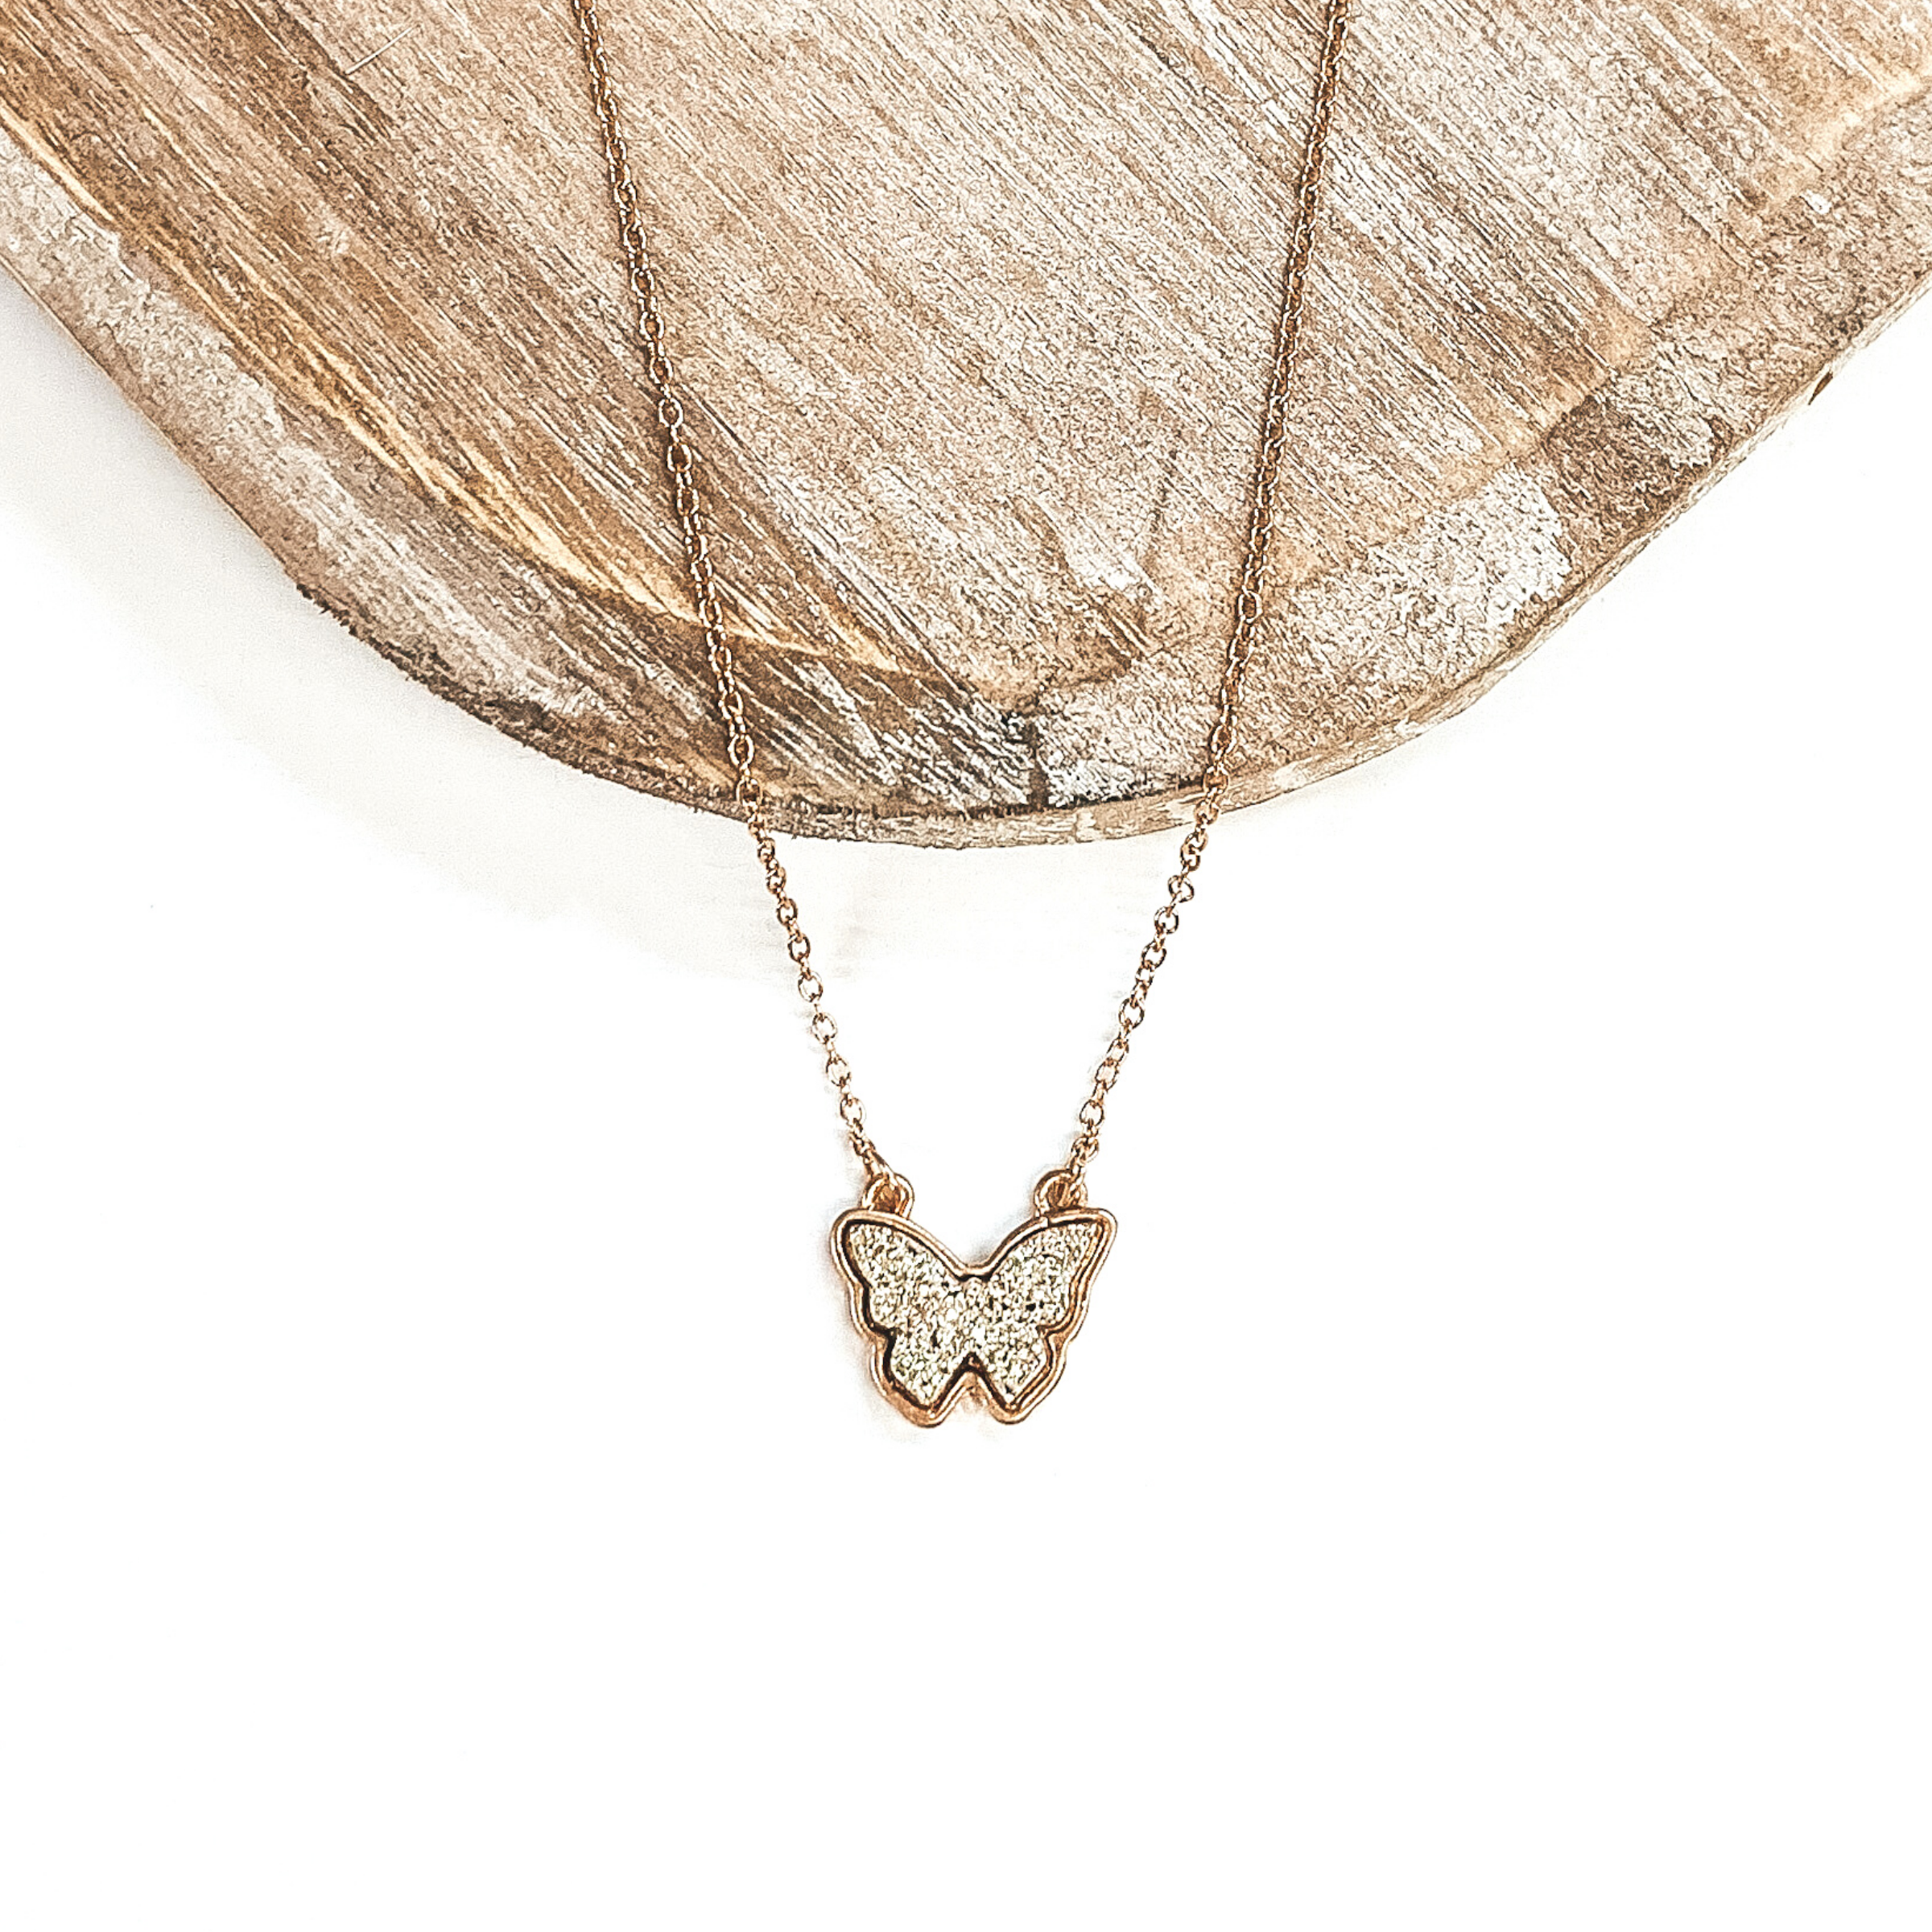 Gold necklace with white gold druzy butterfly pendant. Pictured on a white and brown background.